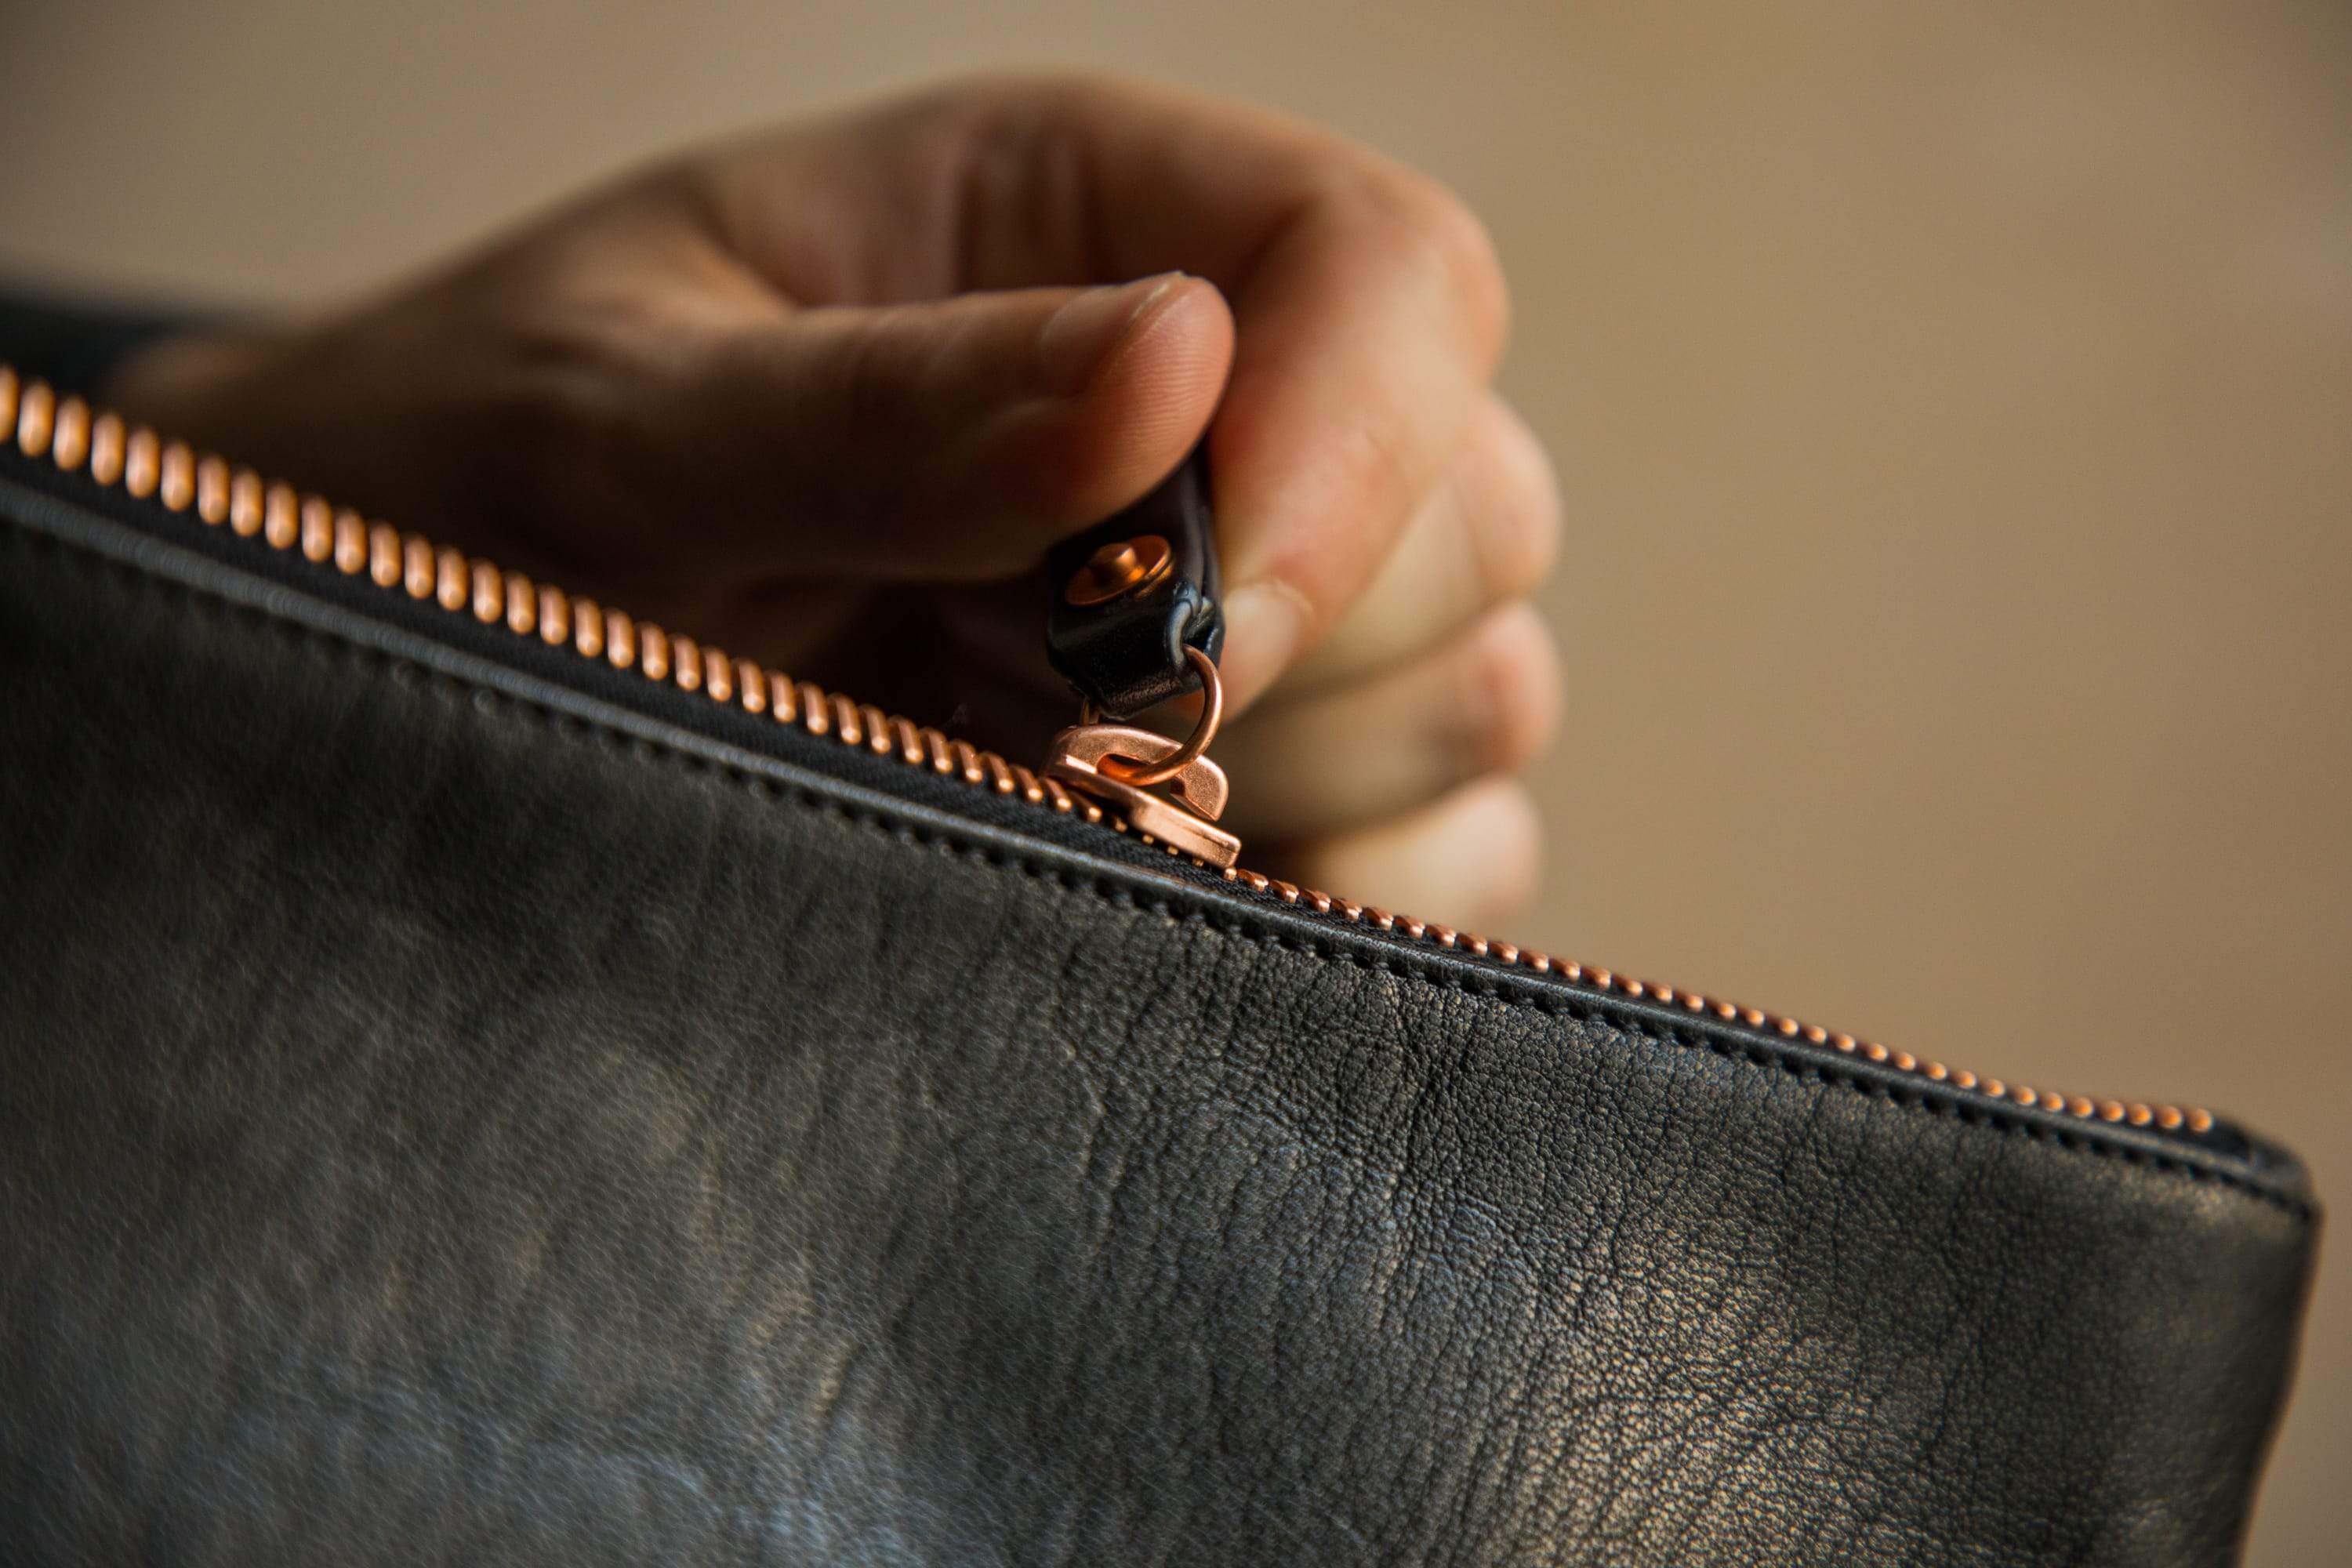 Where to buy handmade leather goods in Europe